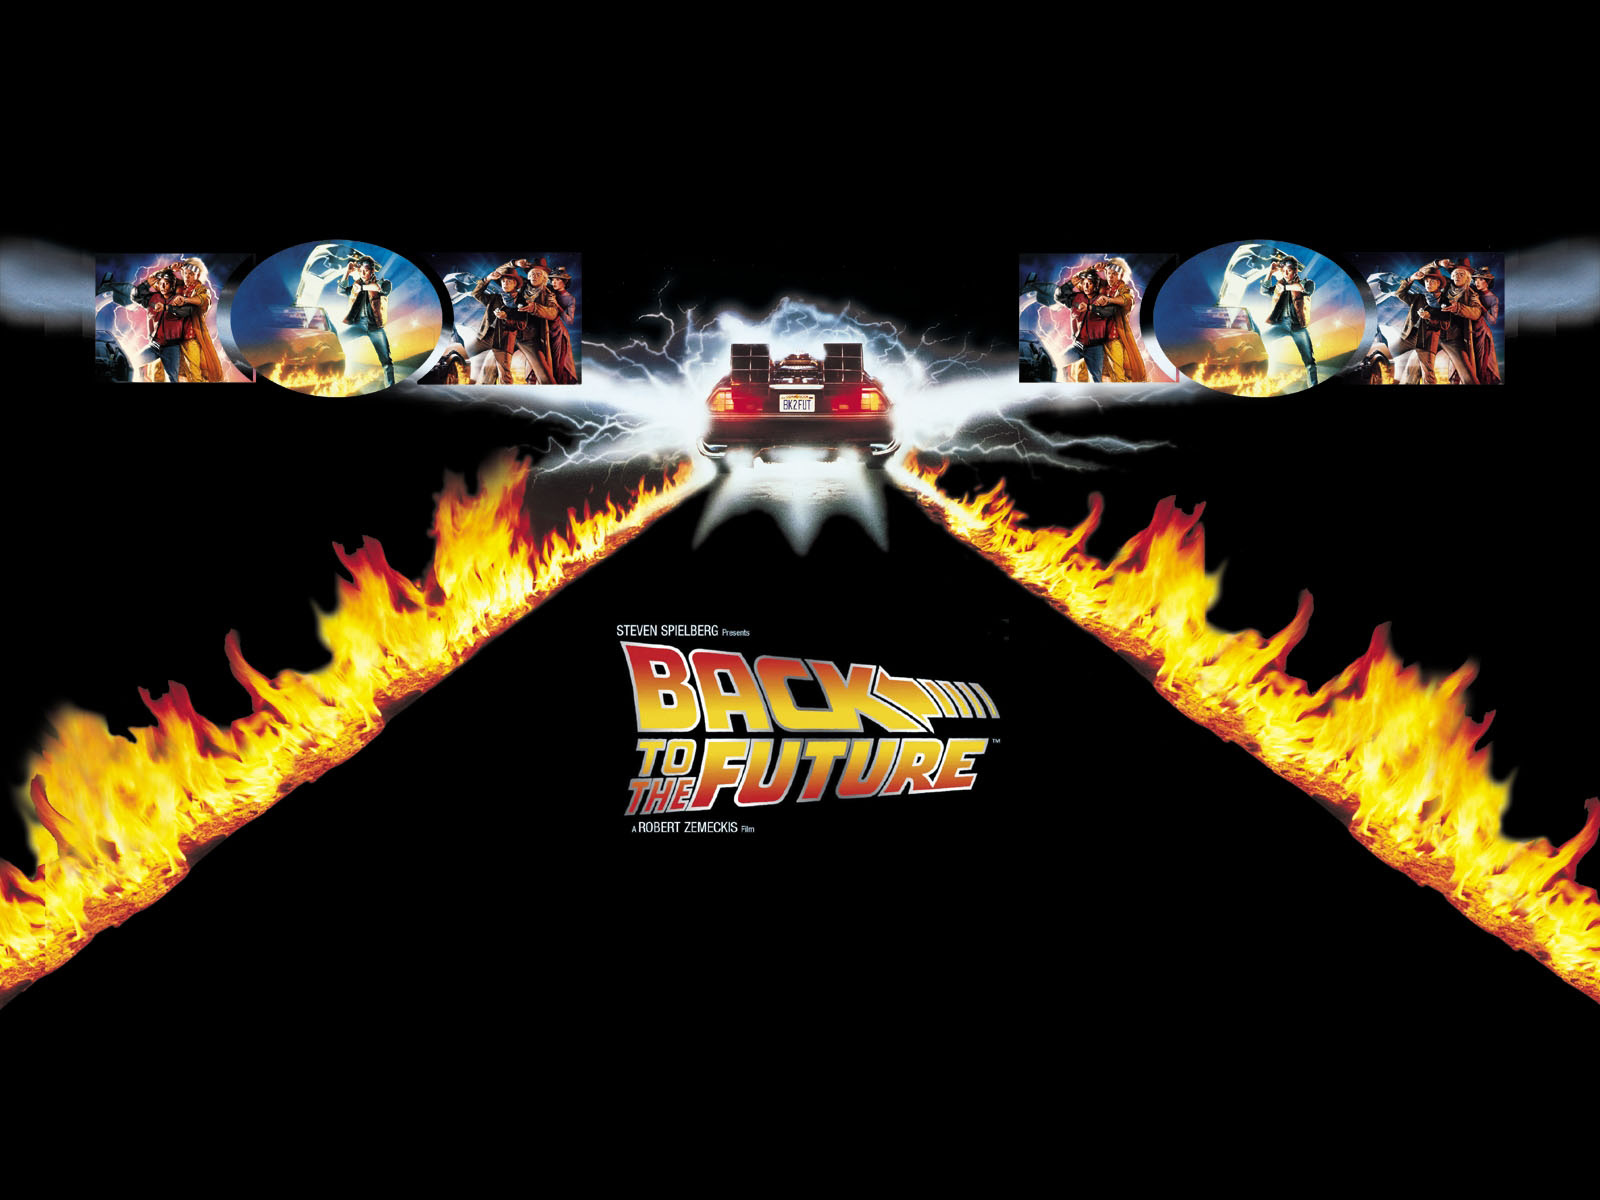 back to the future, movie